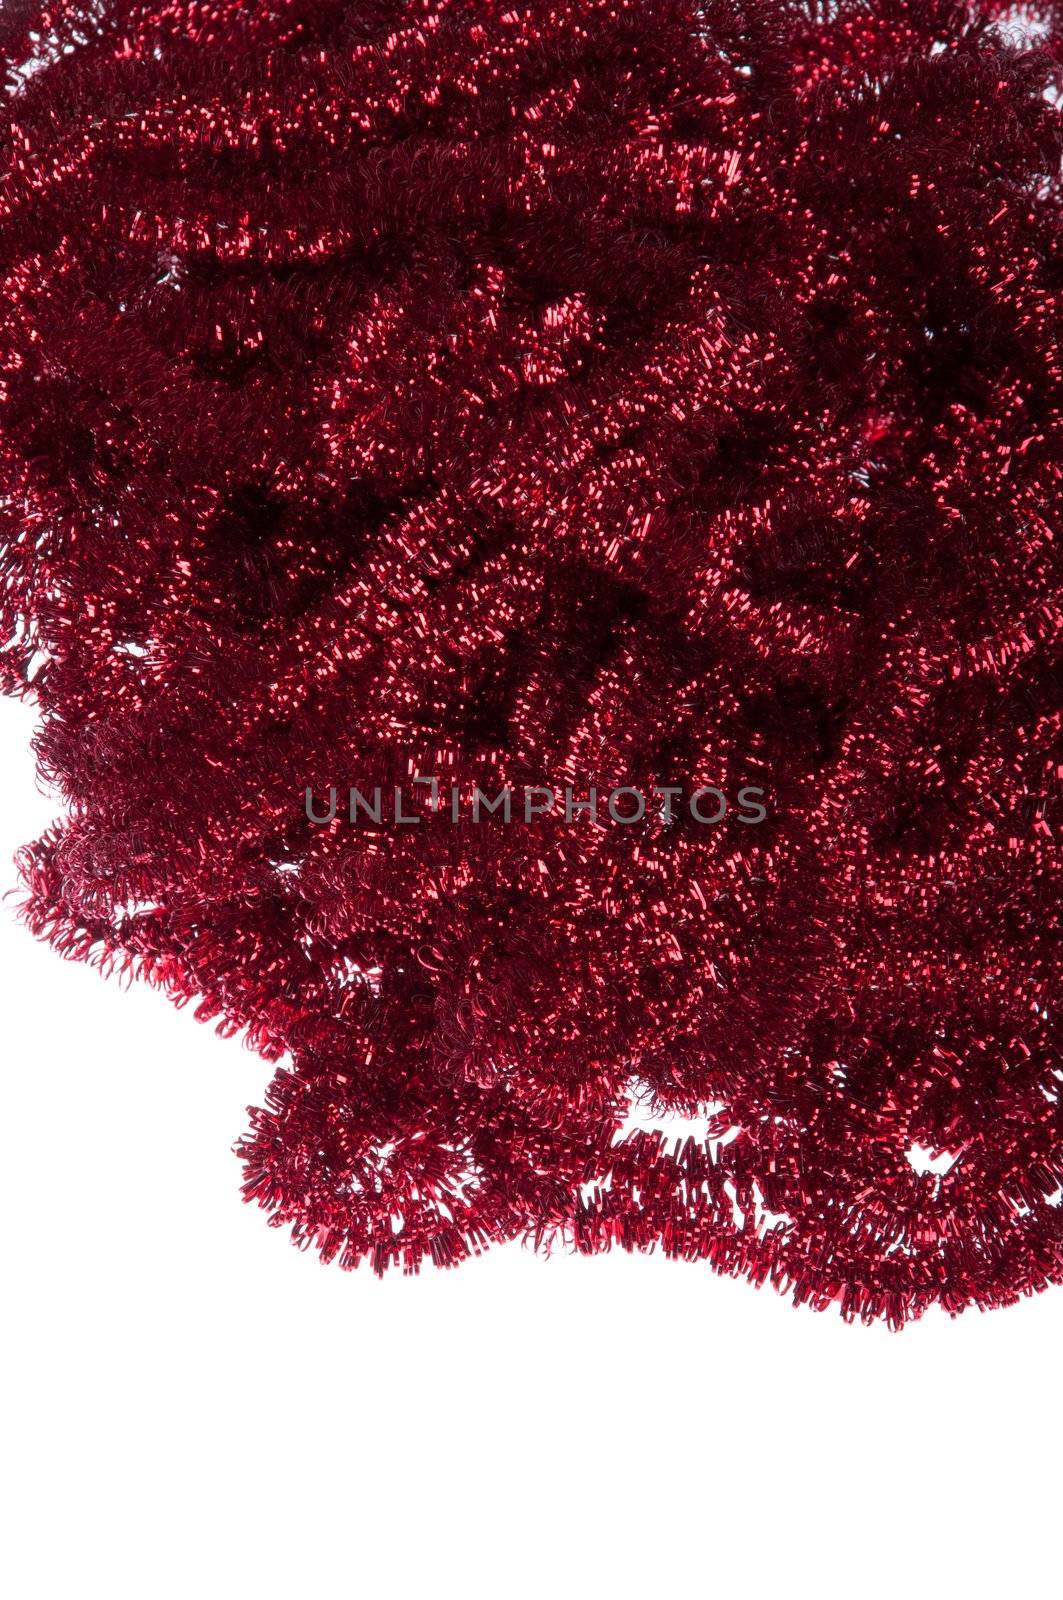 red Christmas tinsel decorations isolated on white background (copy-space available)